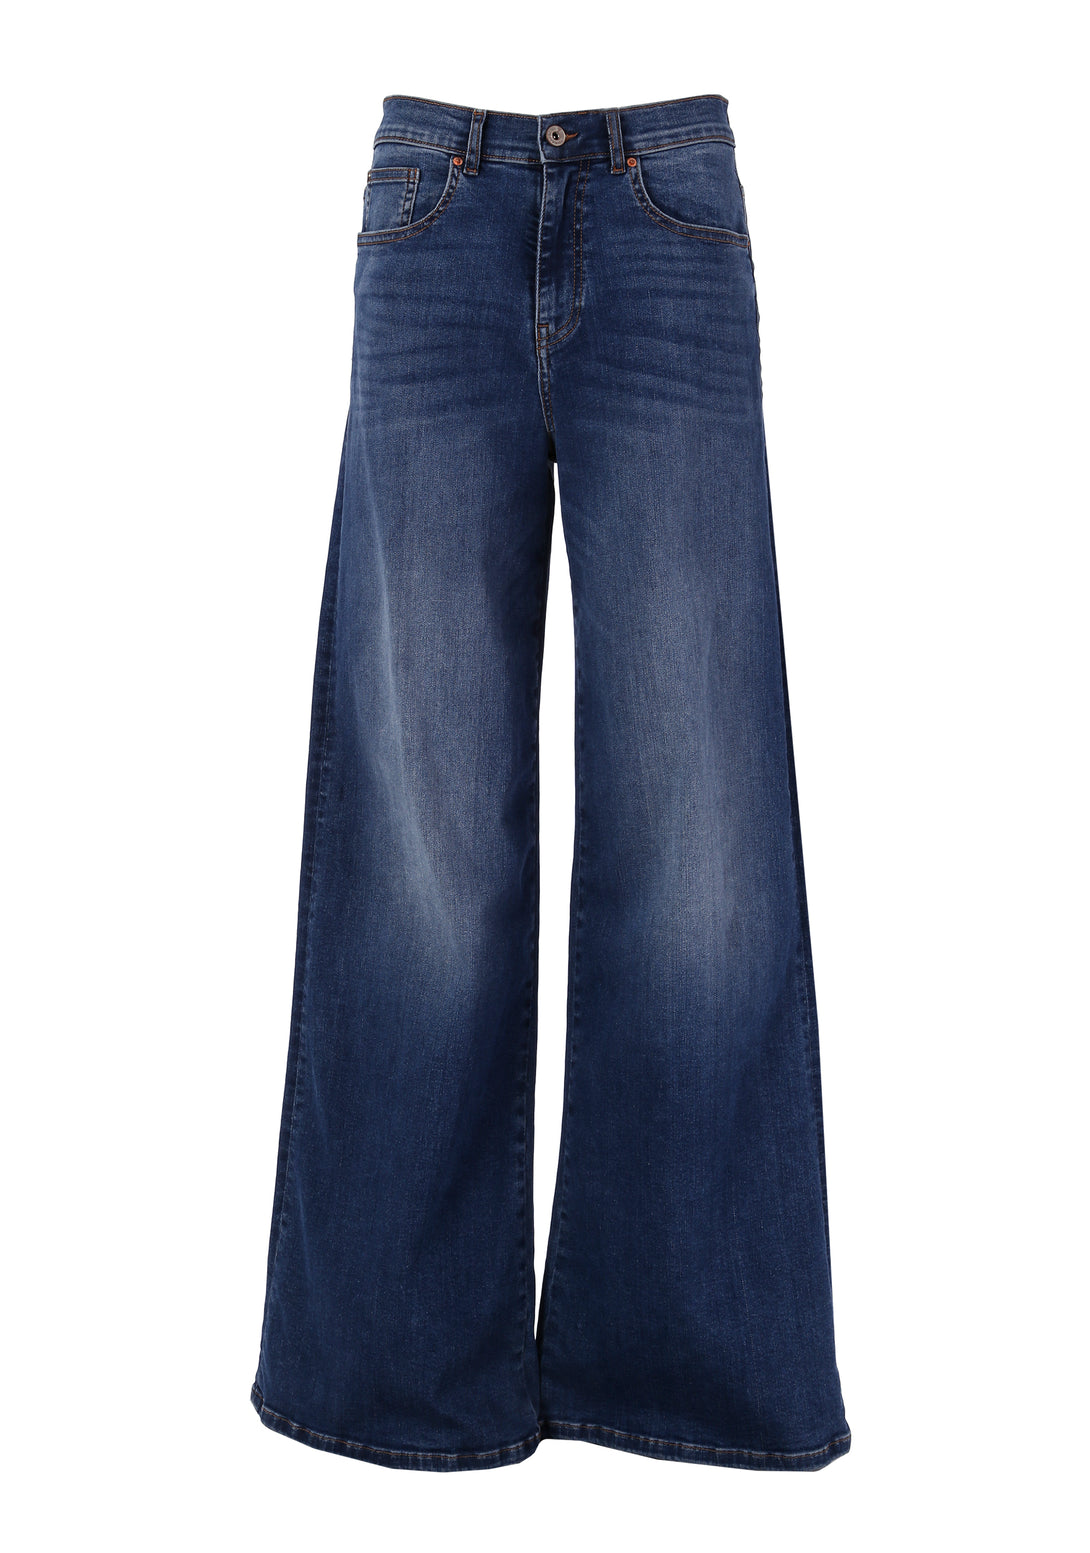 Jeans flare made in denim with middle stone wash Fracomina FP24SV3015D40402-349-1